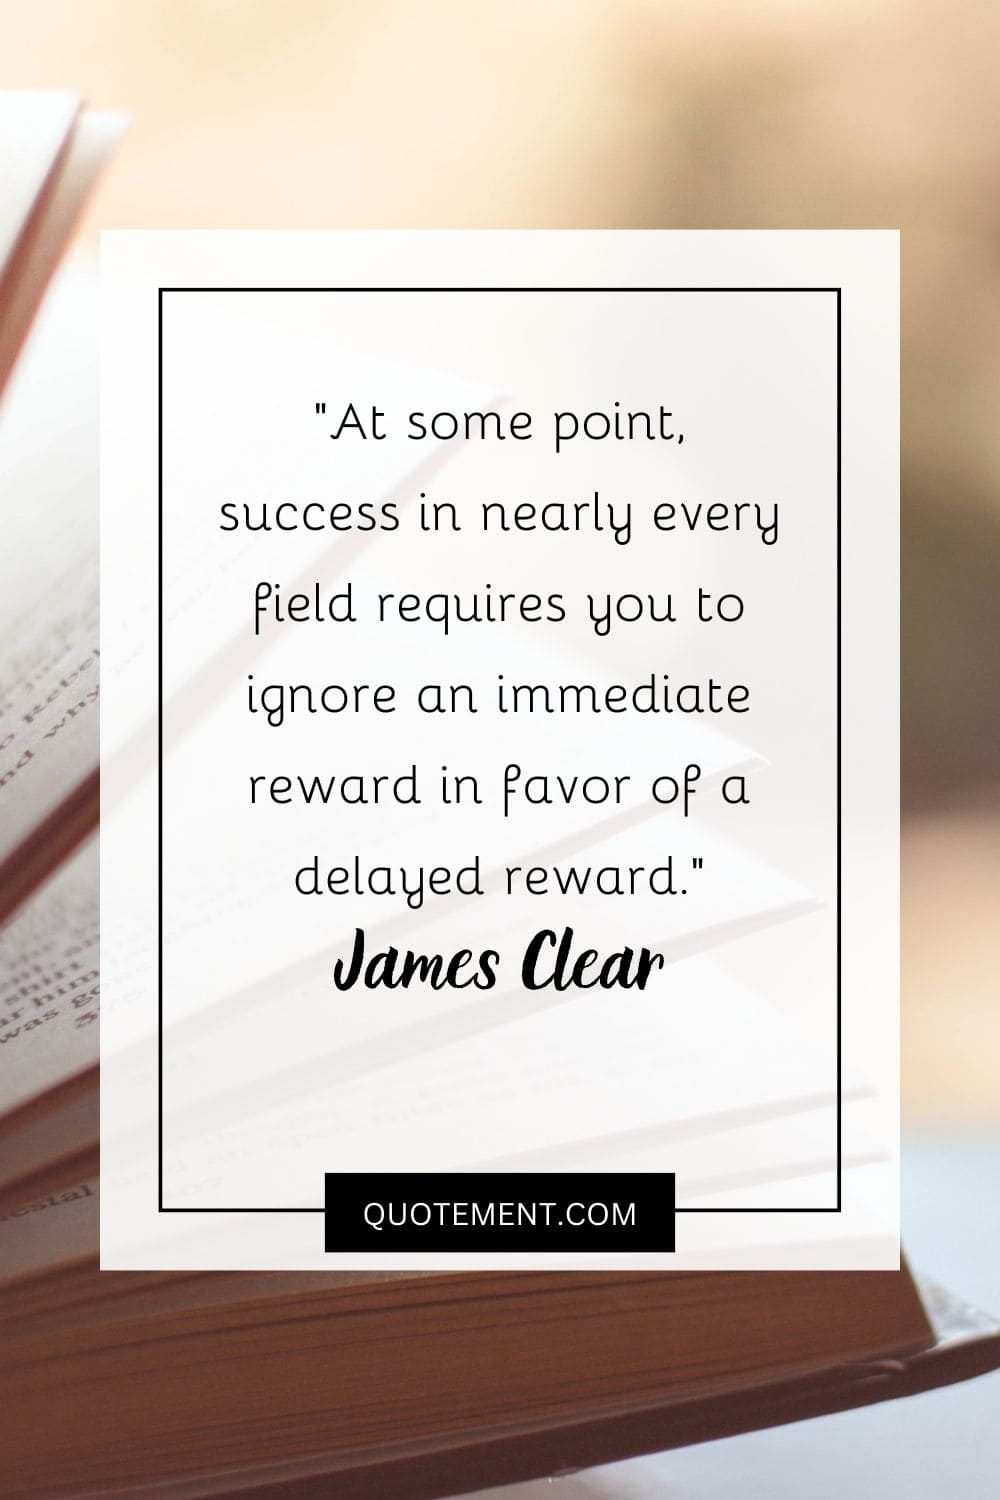 At some point, success in nearly every field requires you to ignore an immediate reward in favor of a delayed reward